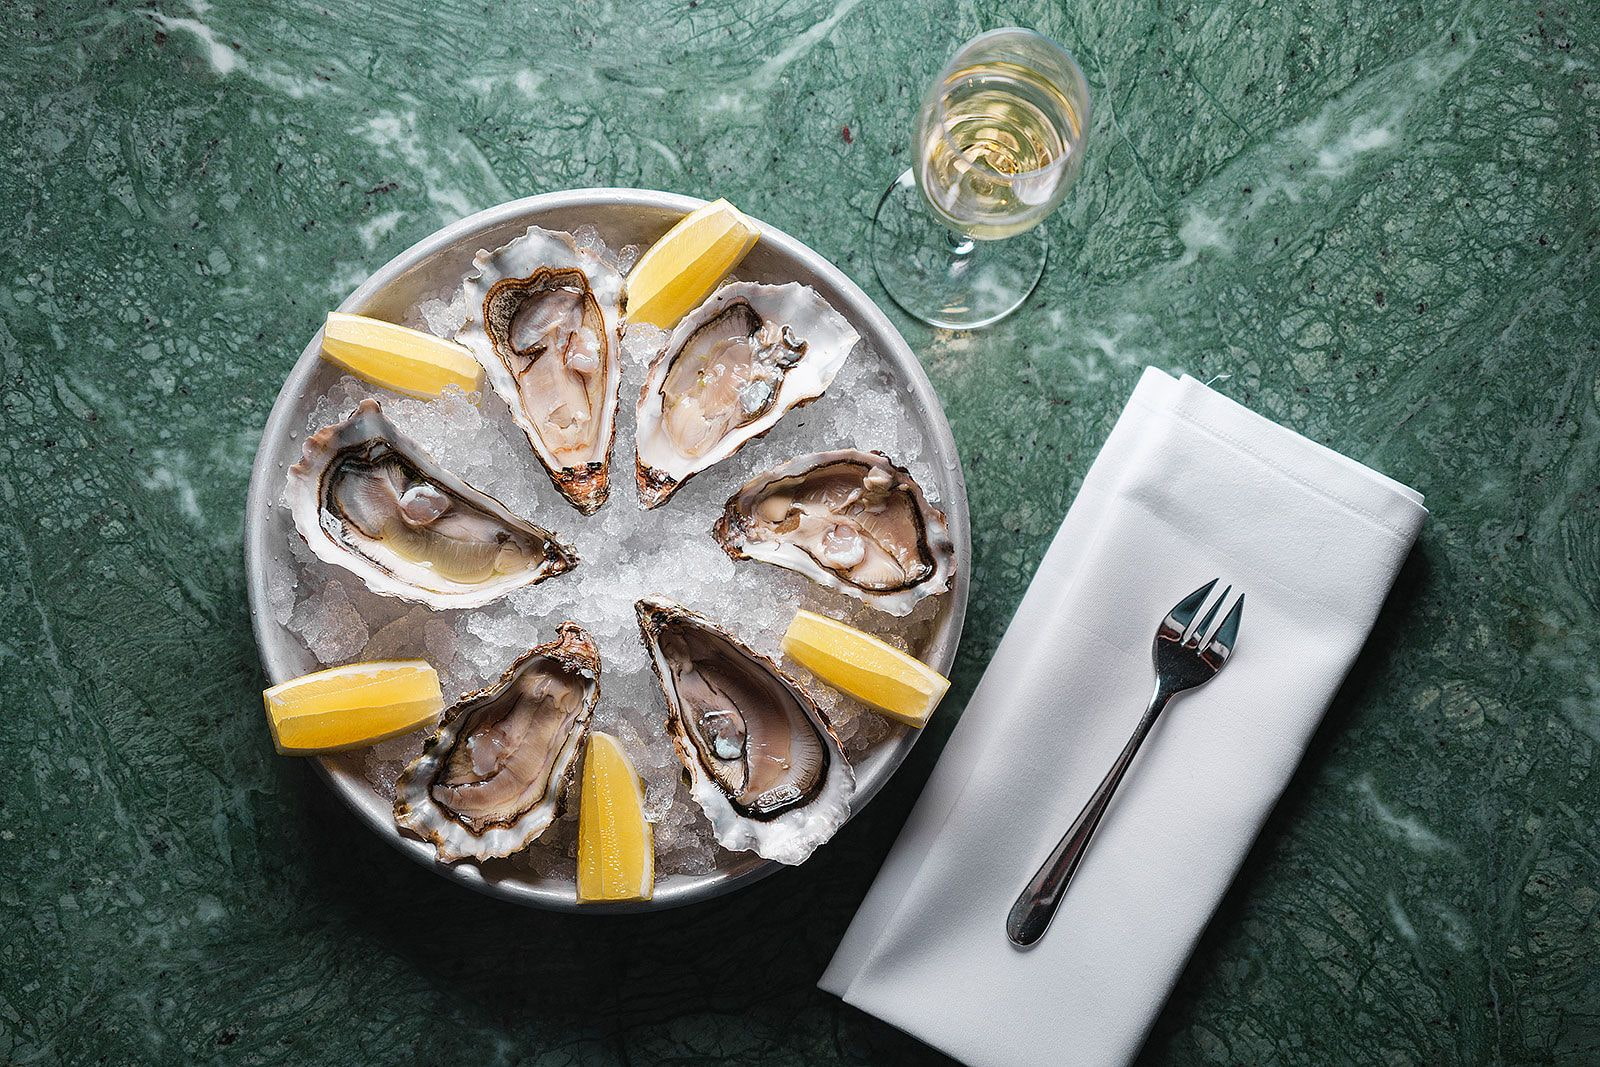 Where to eat oysters in London